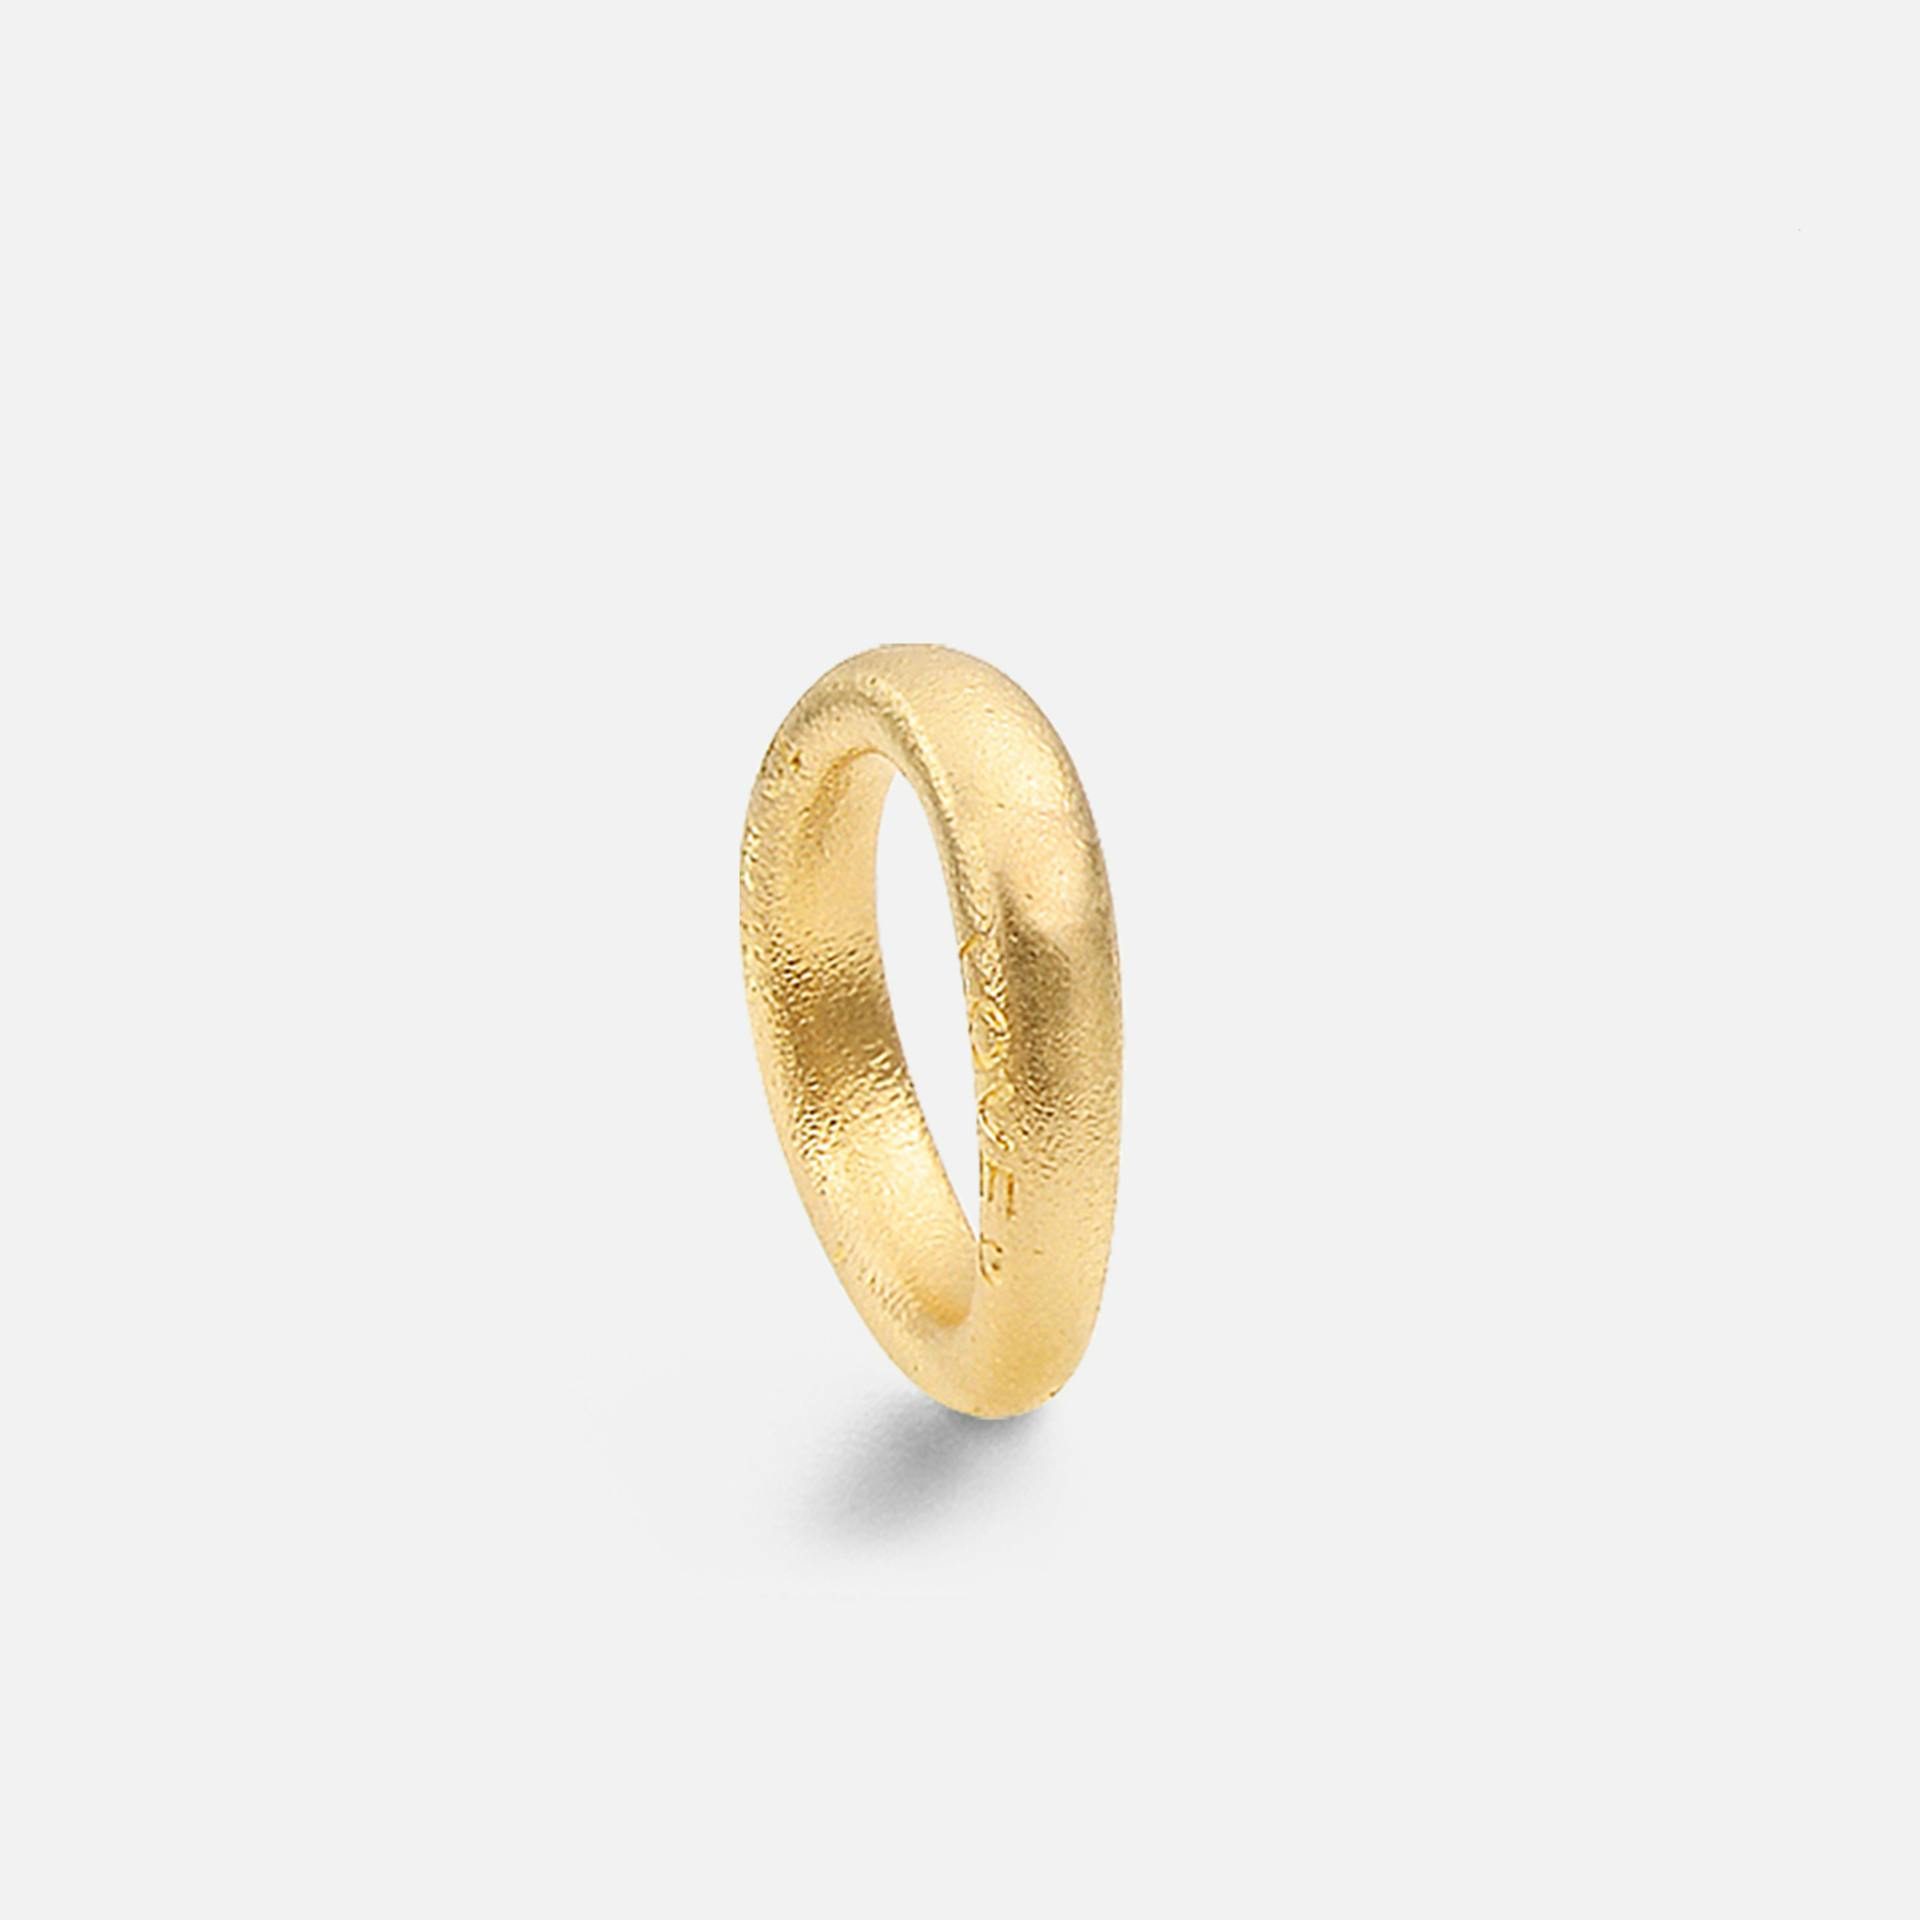 Love ring 4 18k gold textured